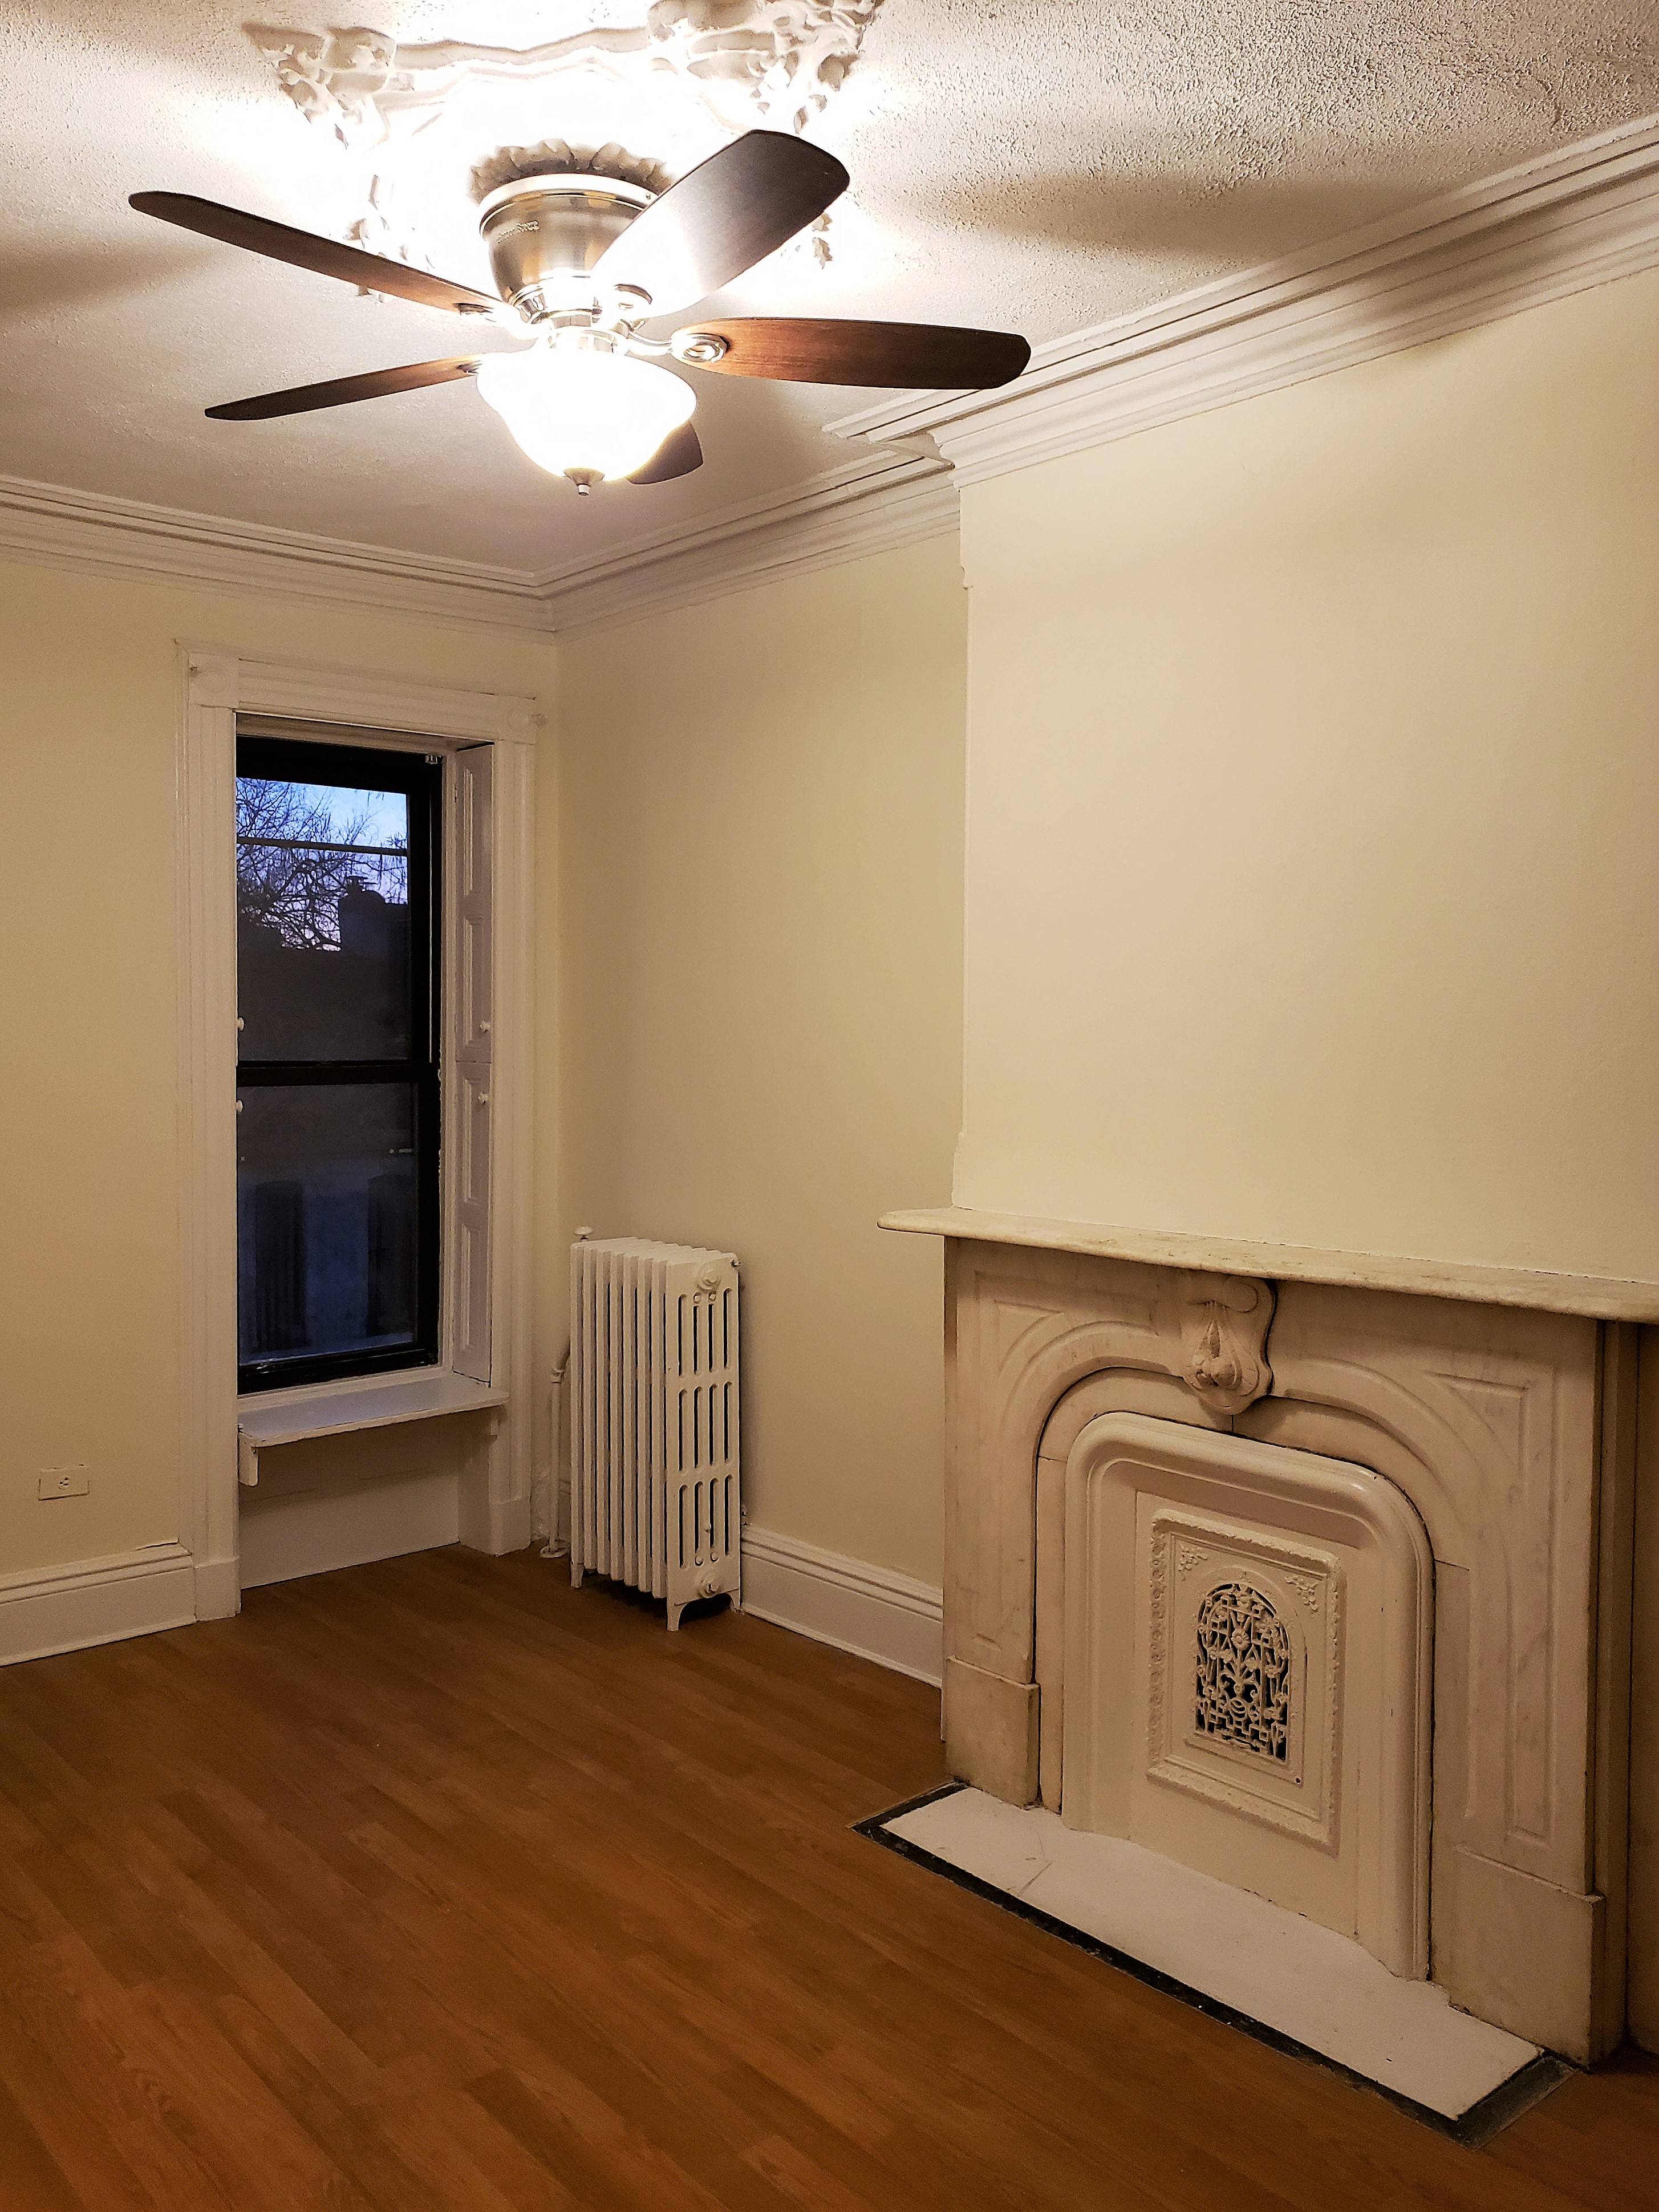 NO FEE SHORT TERM 6 MONTH RENTAL Ideally located in the heart of Park Slope, this 2BR bedroom floor thru rental is on the second floor of a beautiful two ...